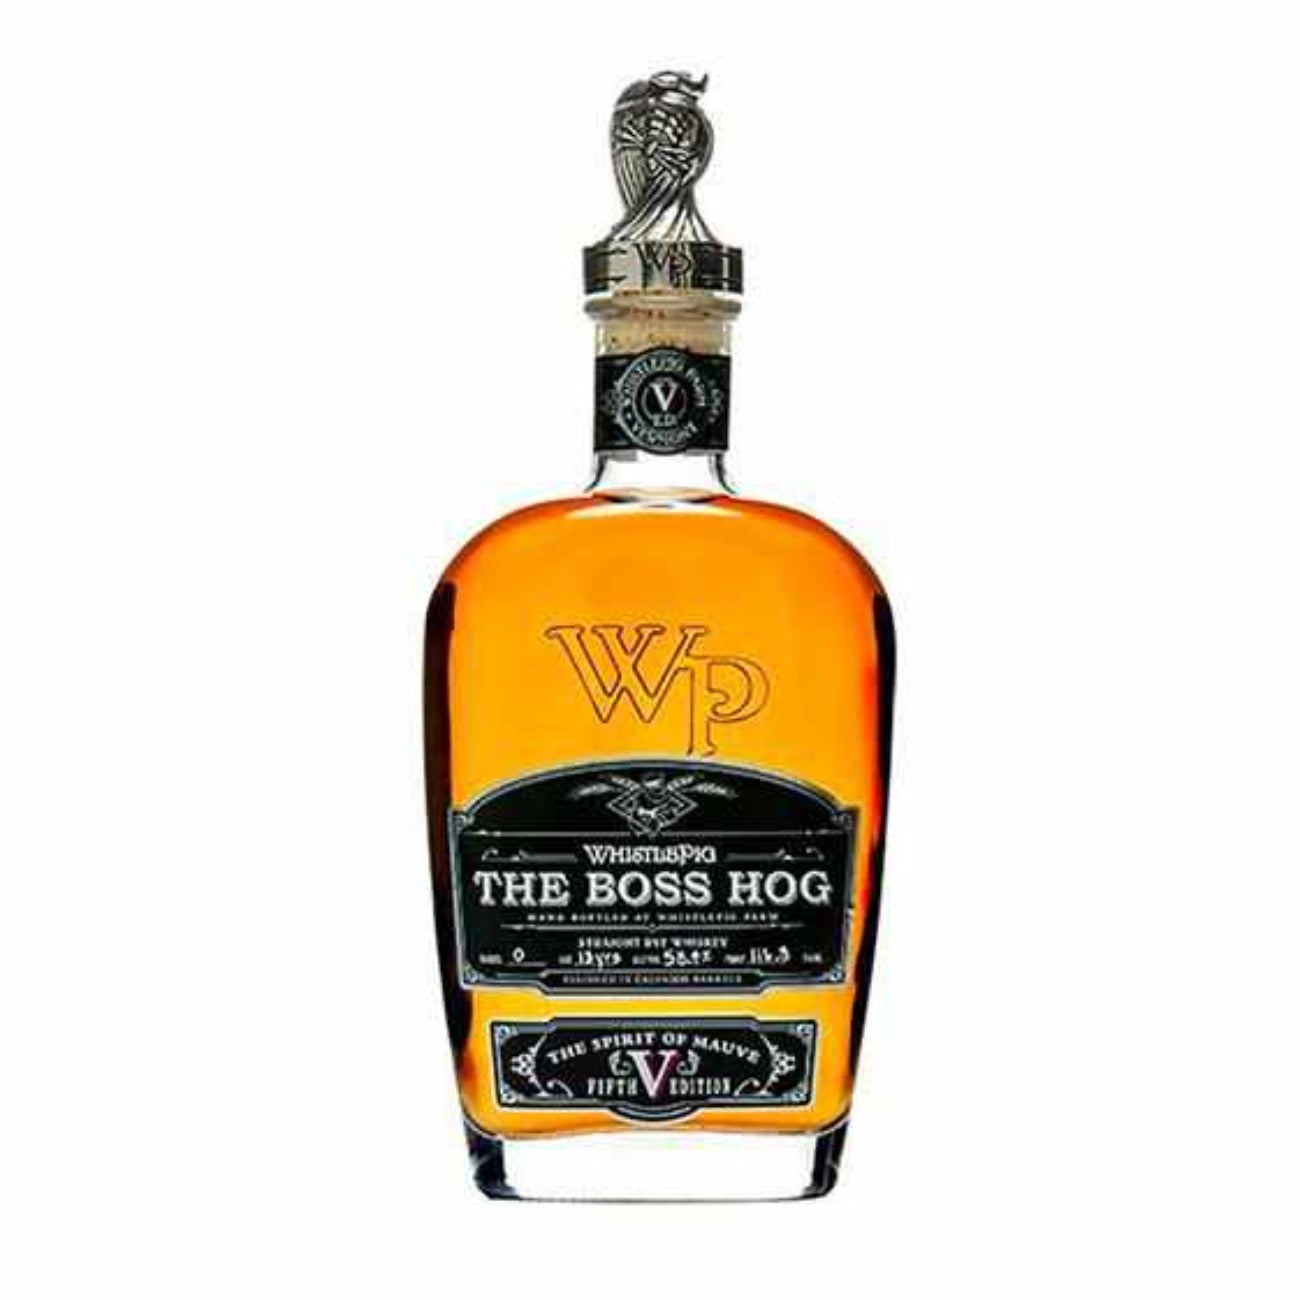 WhistlePig | The Boss Hog 5th Edition The Spirit Of Mauve